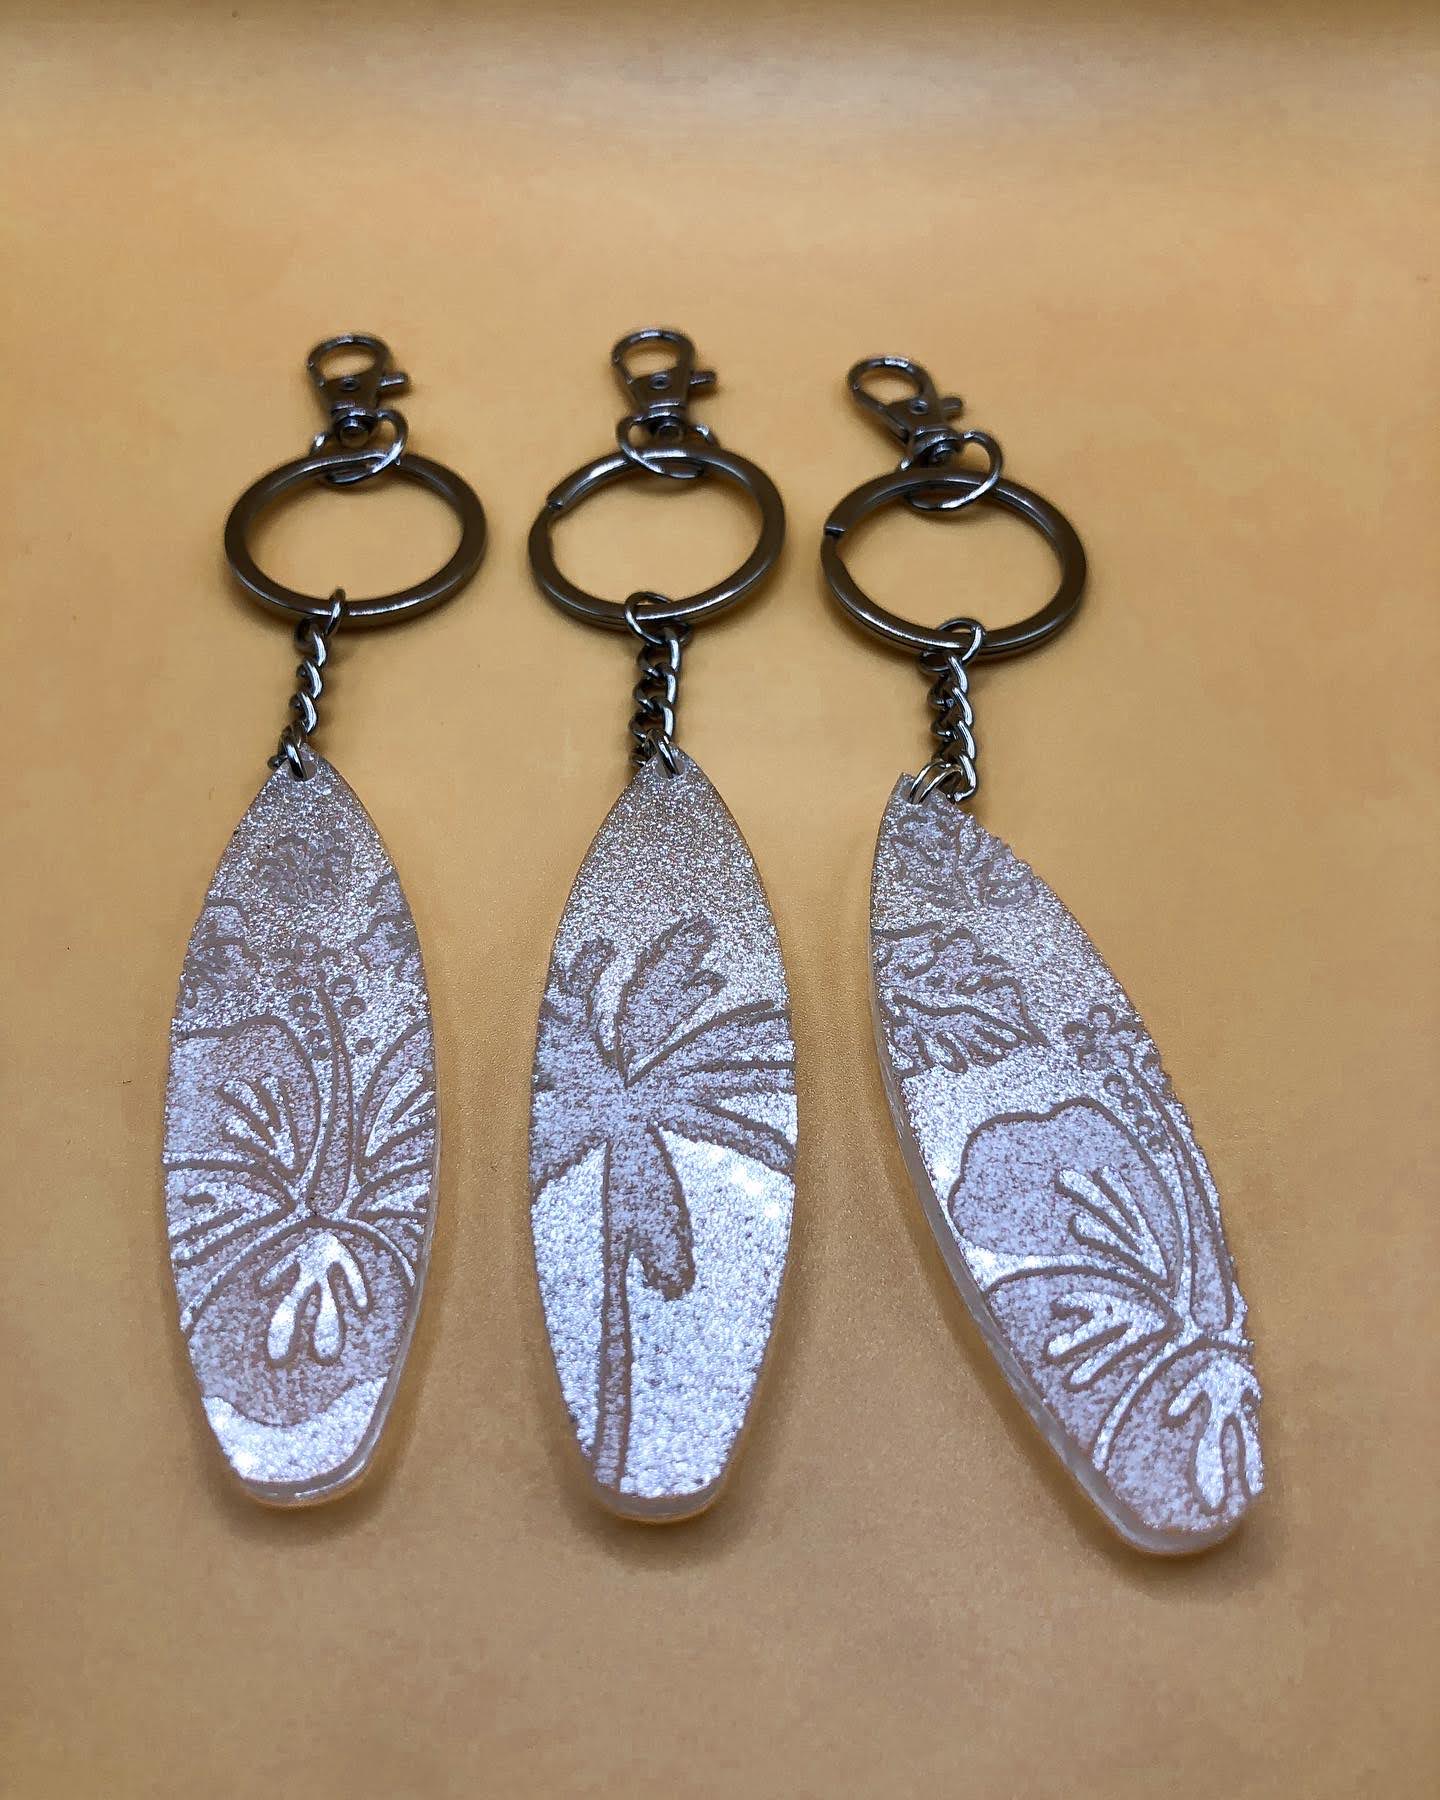 Hibiscus Surfboard Keychain with Snap Hook